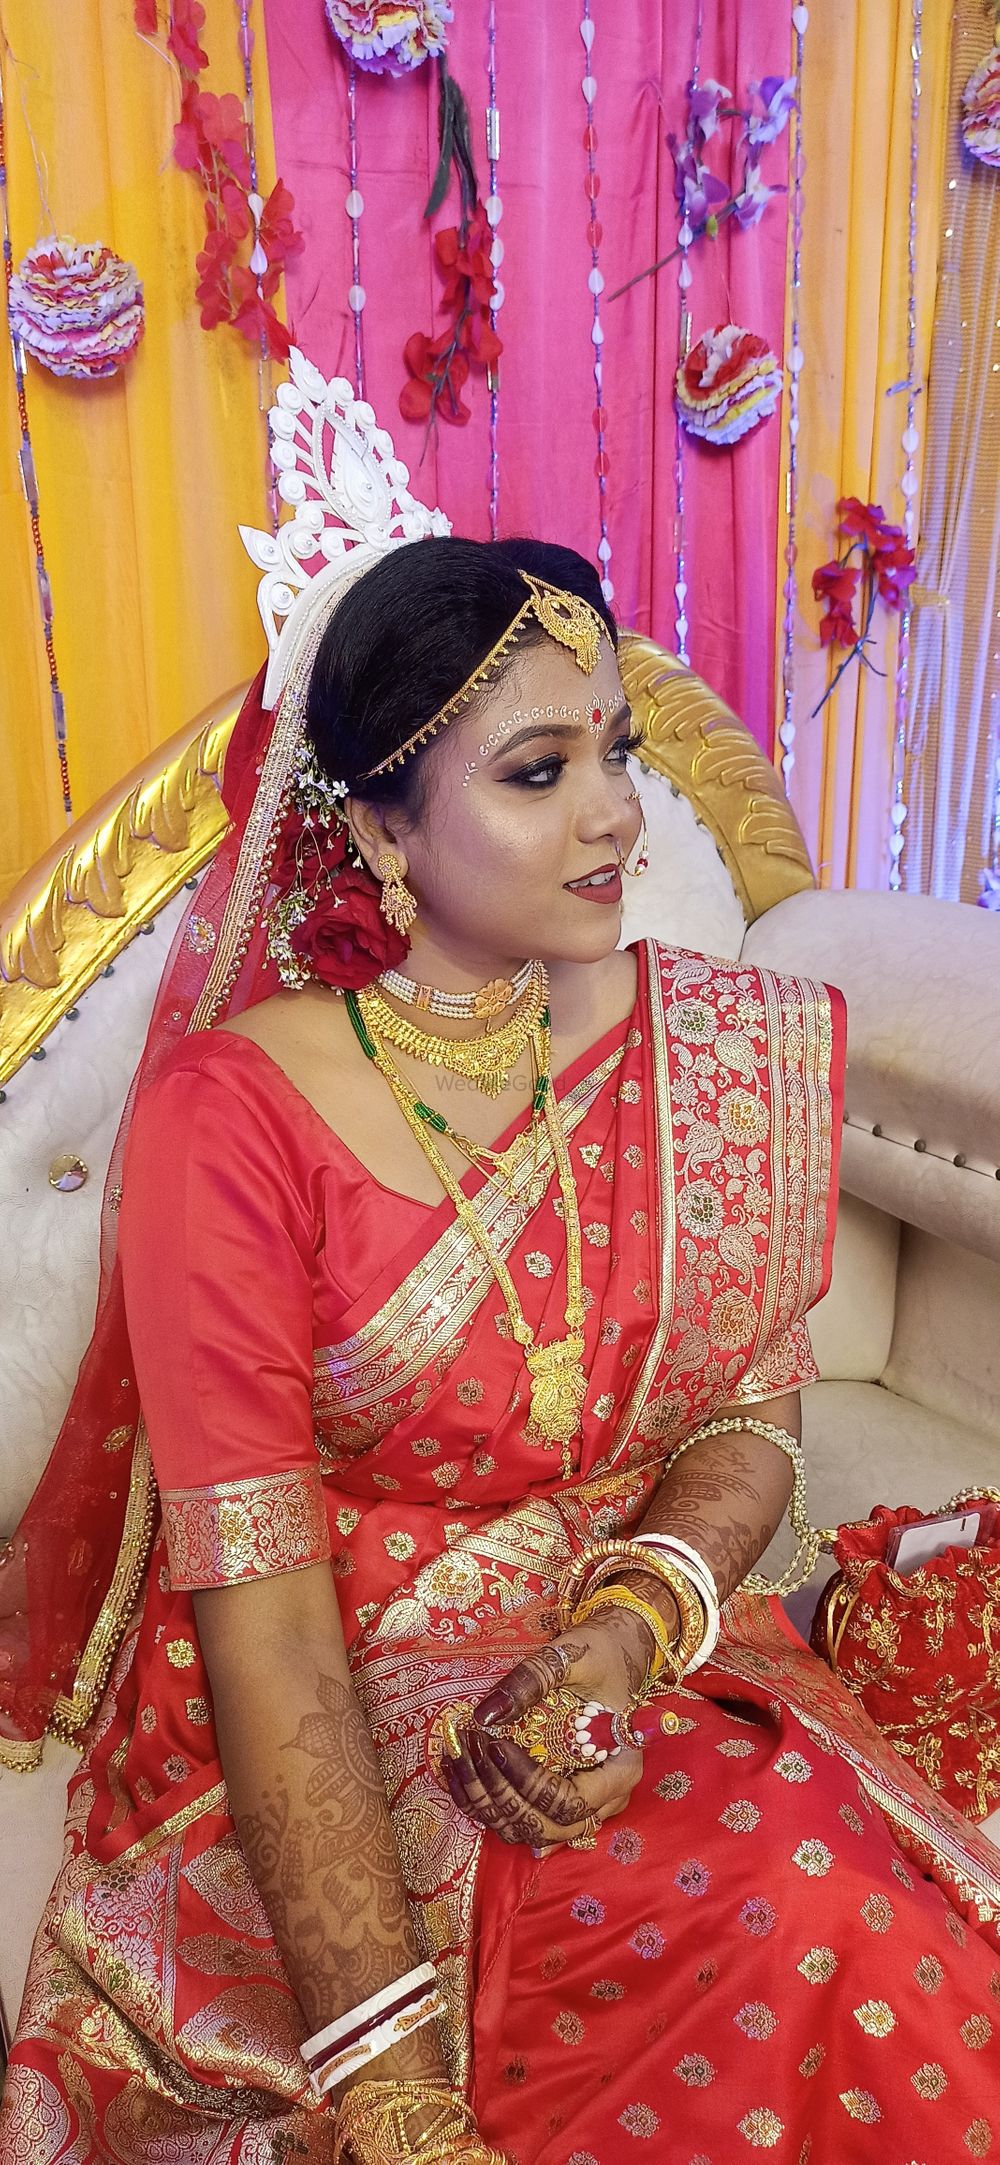 Photo From Bridal Makeover-95 - By Rupa's Makeup Mirror